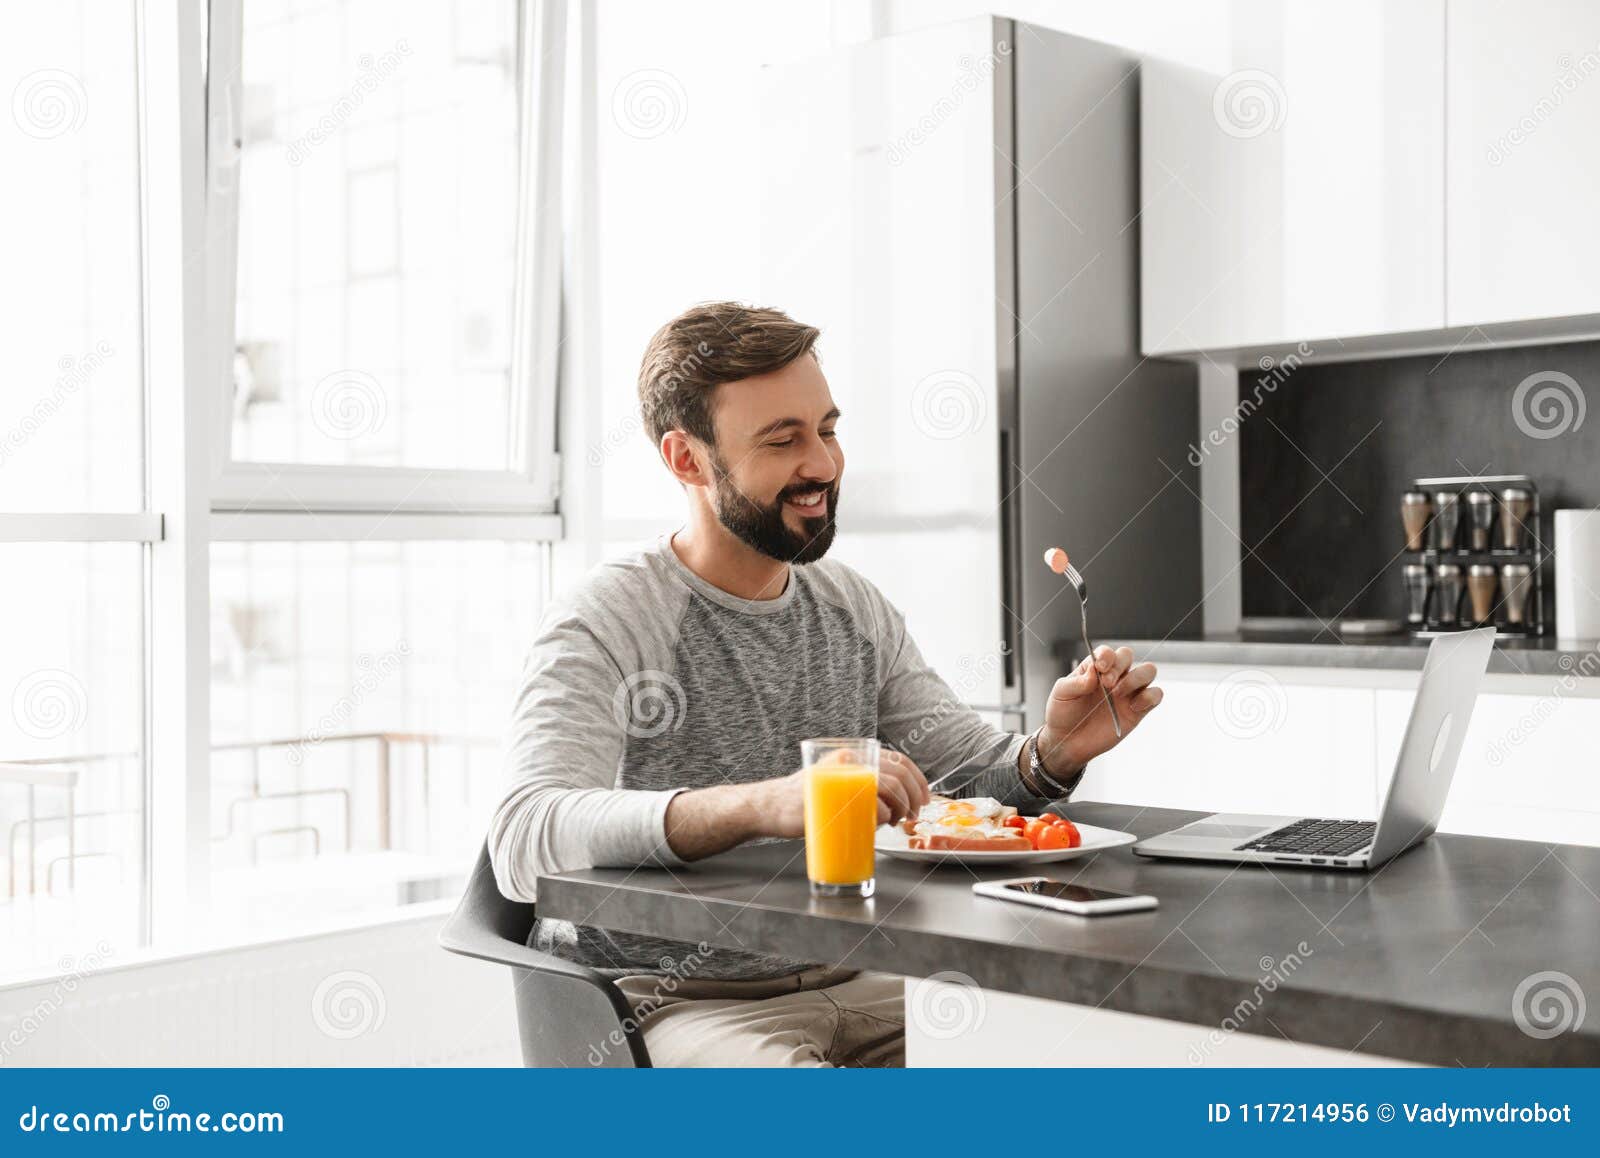 Portrait Of A Smiling Young Man Having Breakfast Stock Photo Image Of